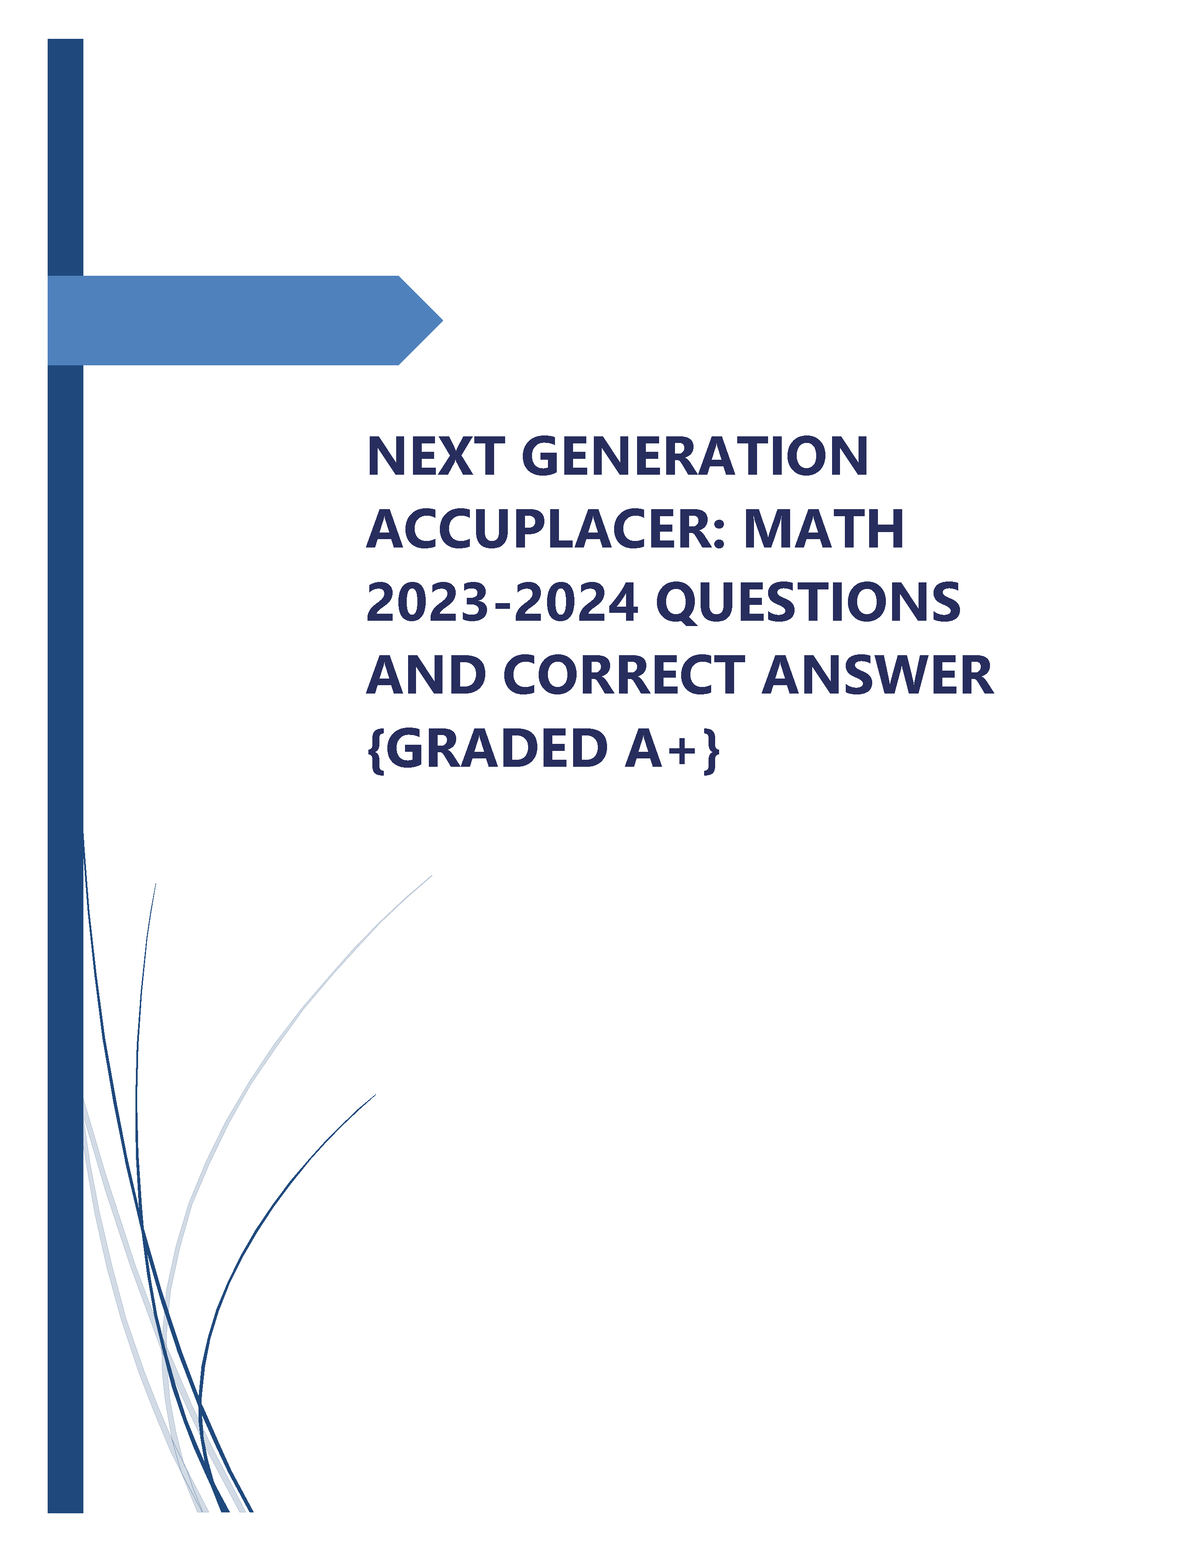 Accuplacermathreview NEXT GENERATION ACCUPLACER MATH 2023 2024